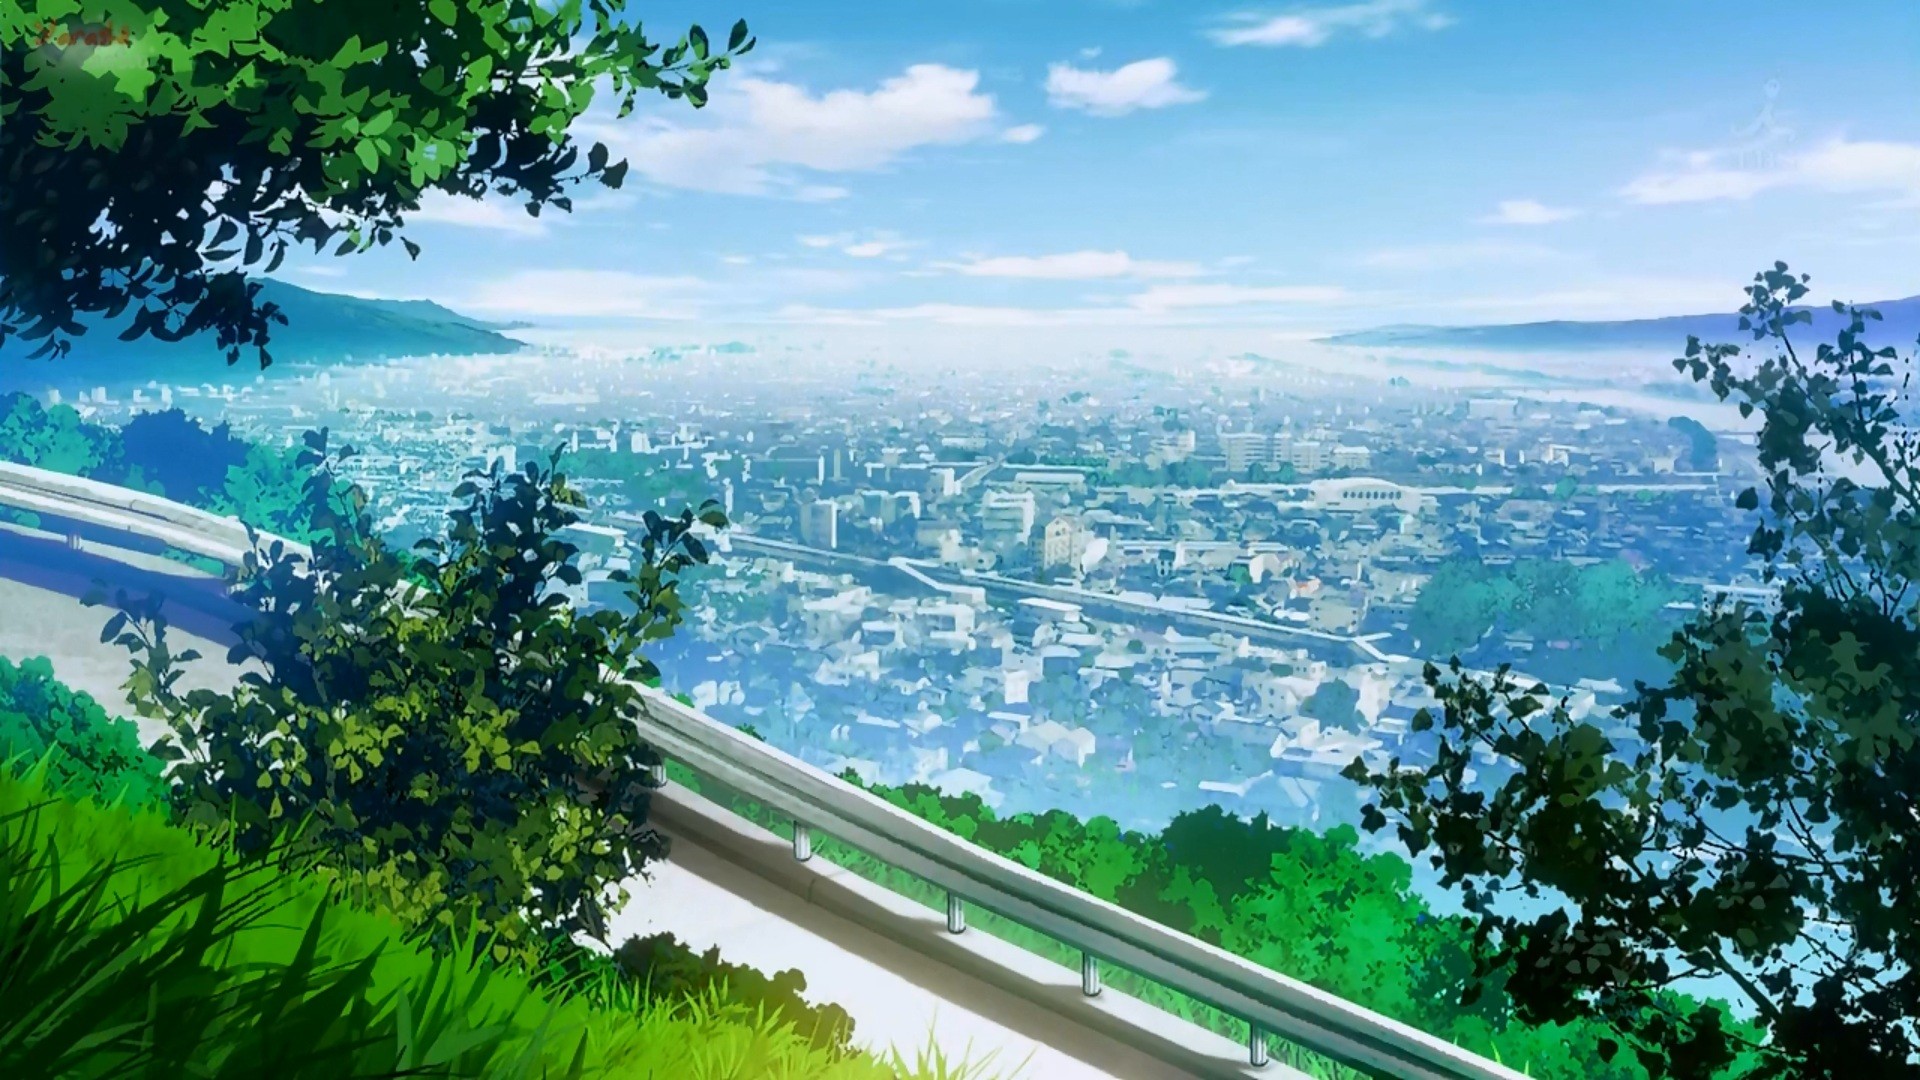 Anime City wallpaper ·① Download free beautiful wallpapers ...